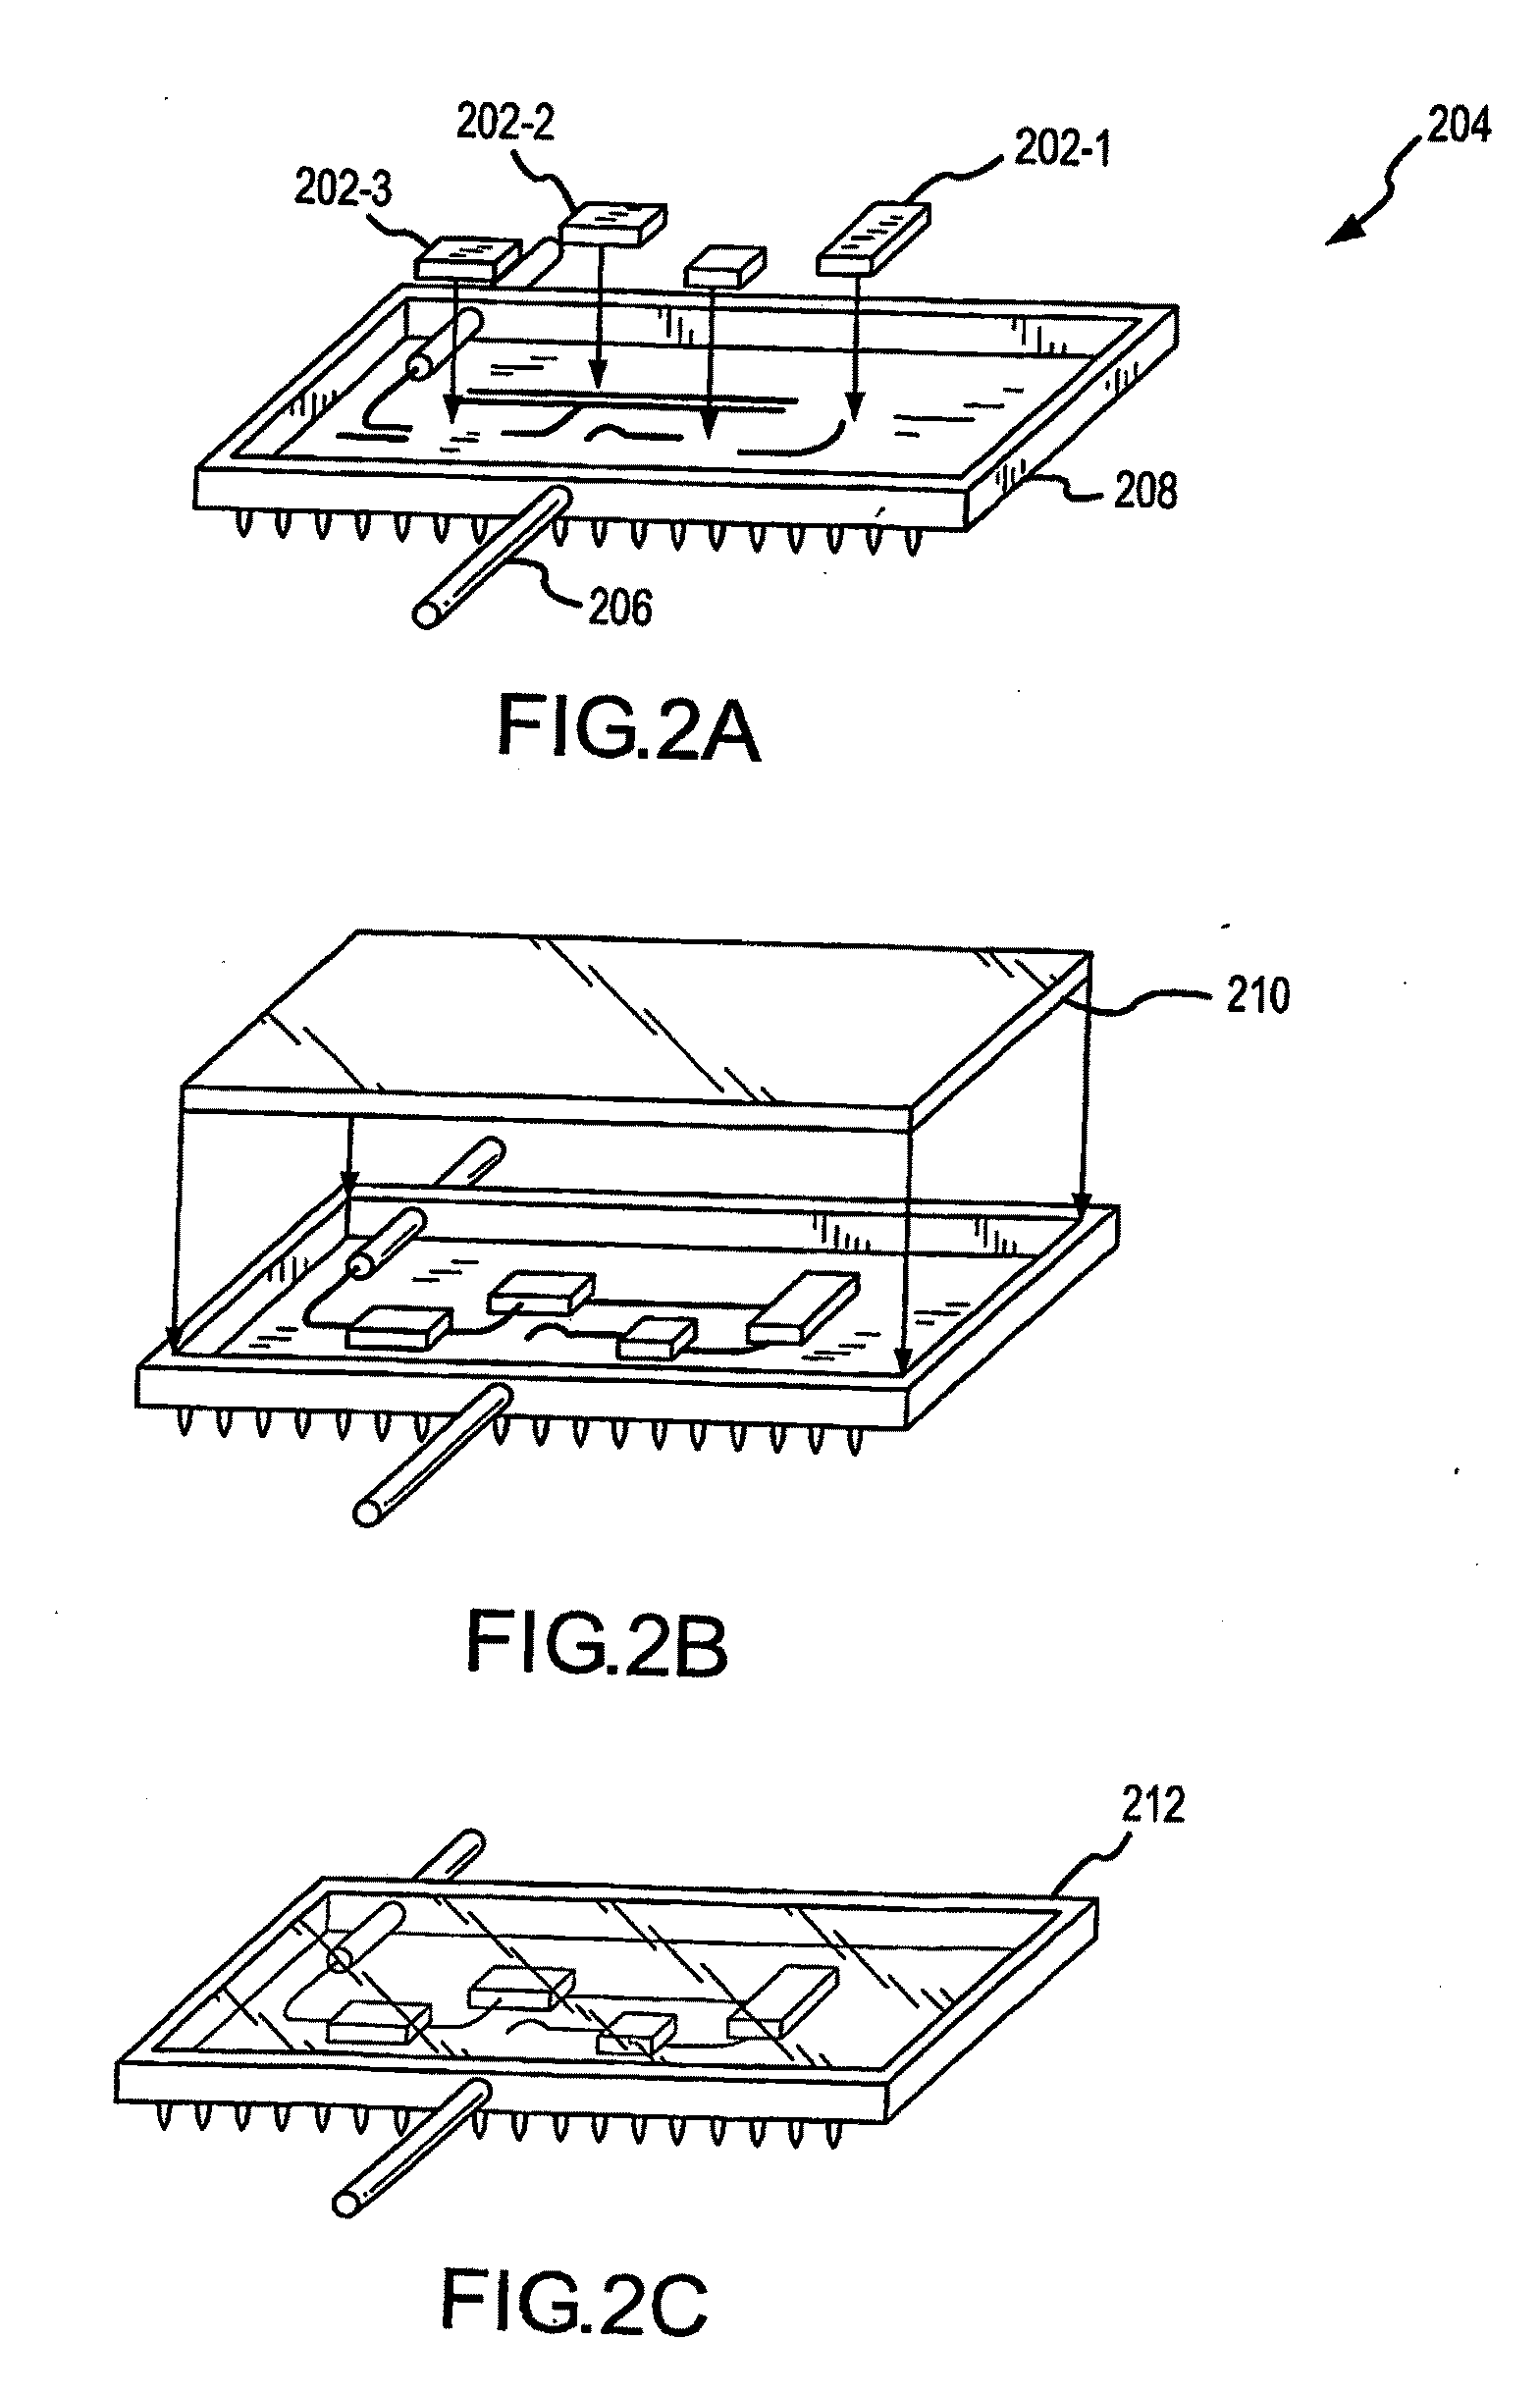 Three-Dimensional Direct-Write Lithography